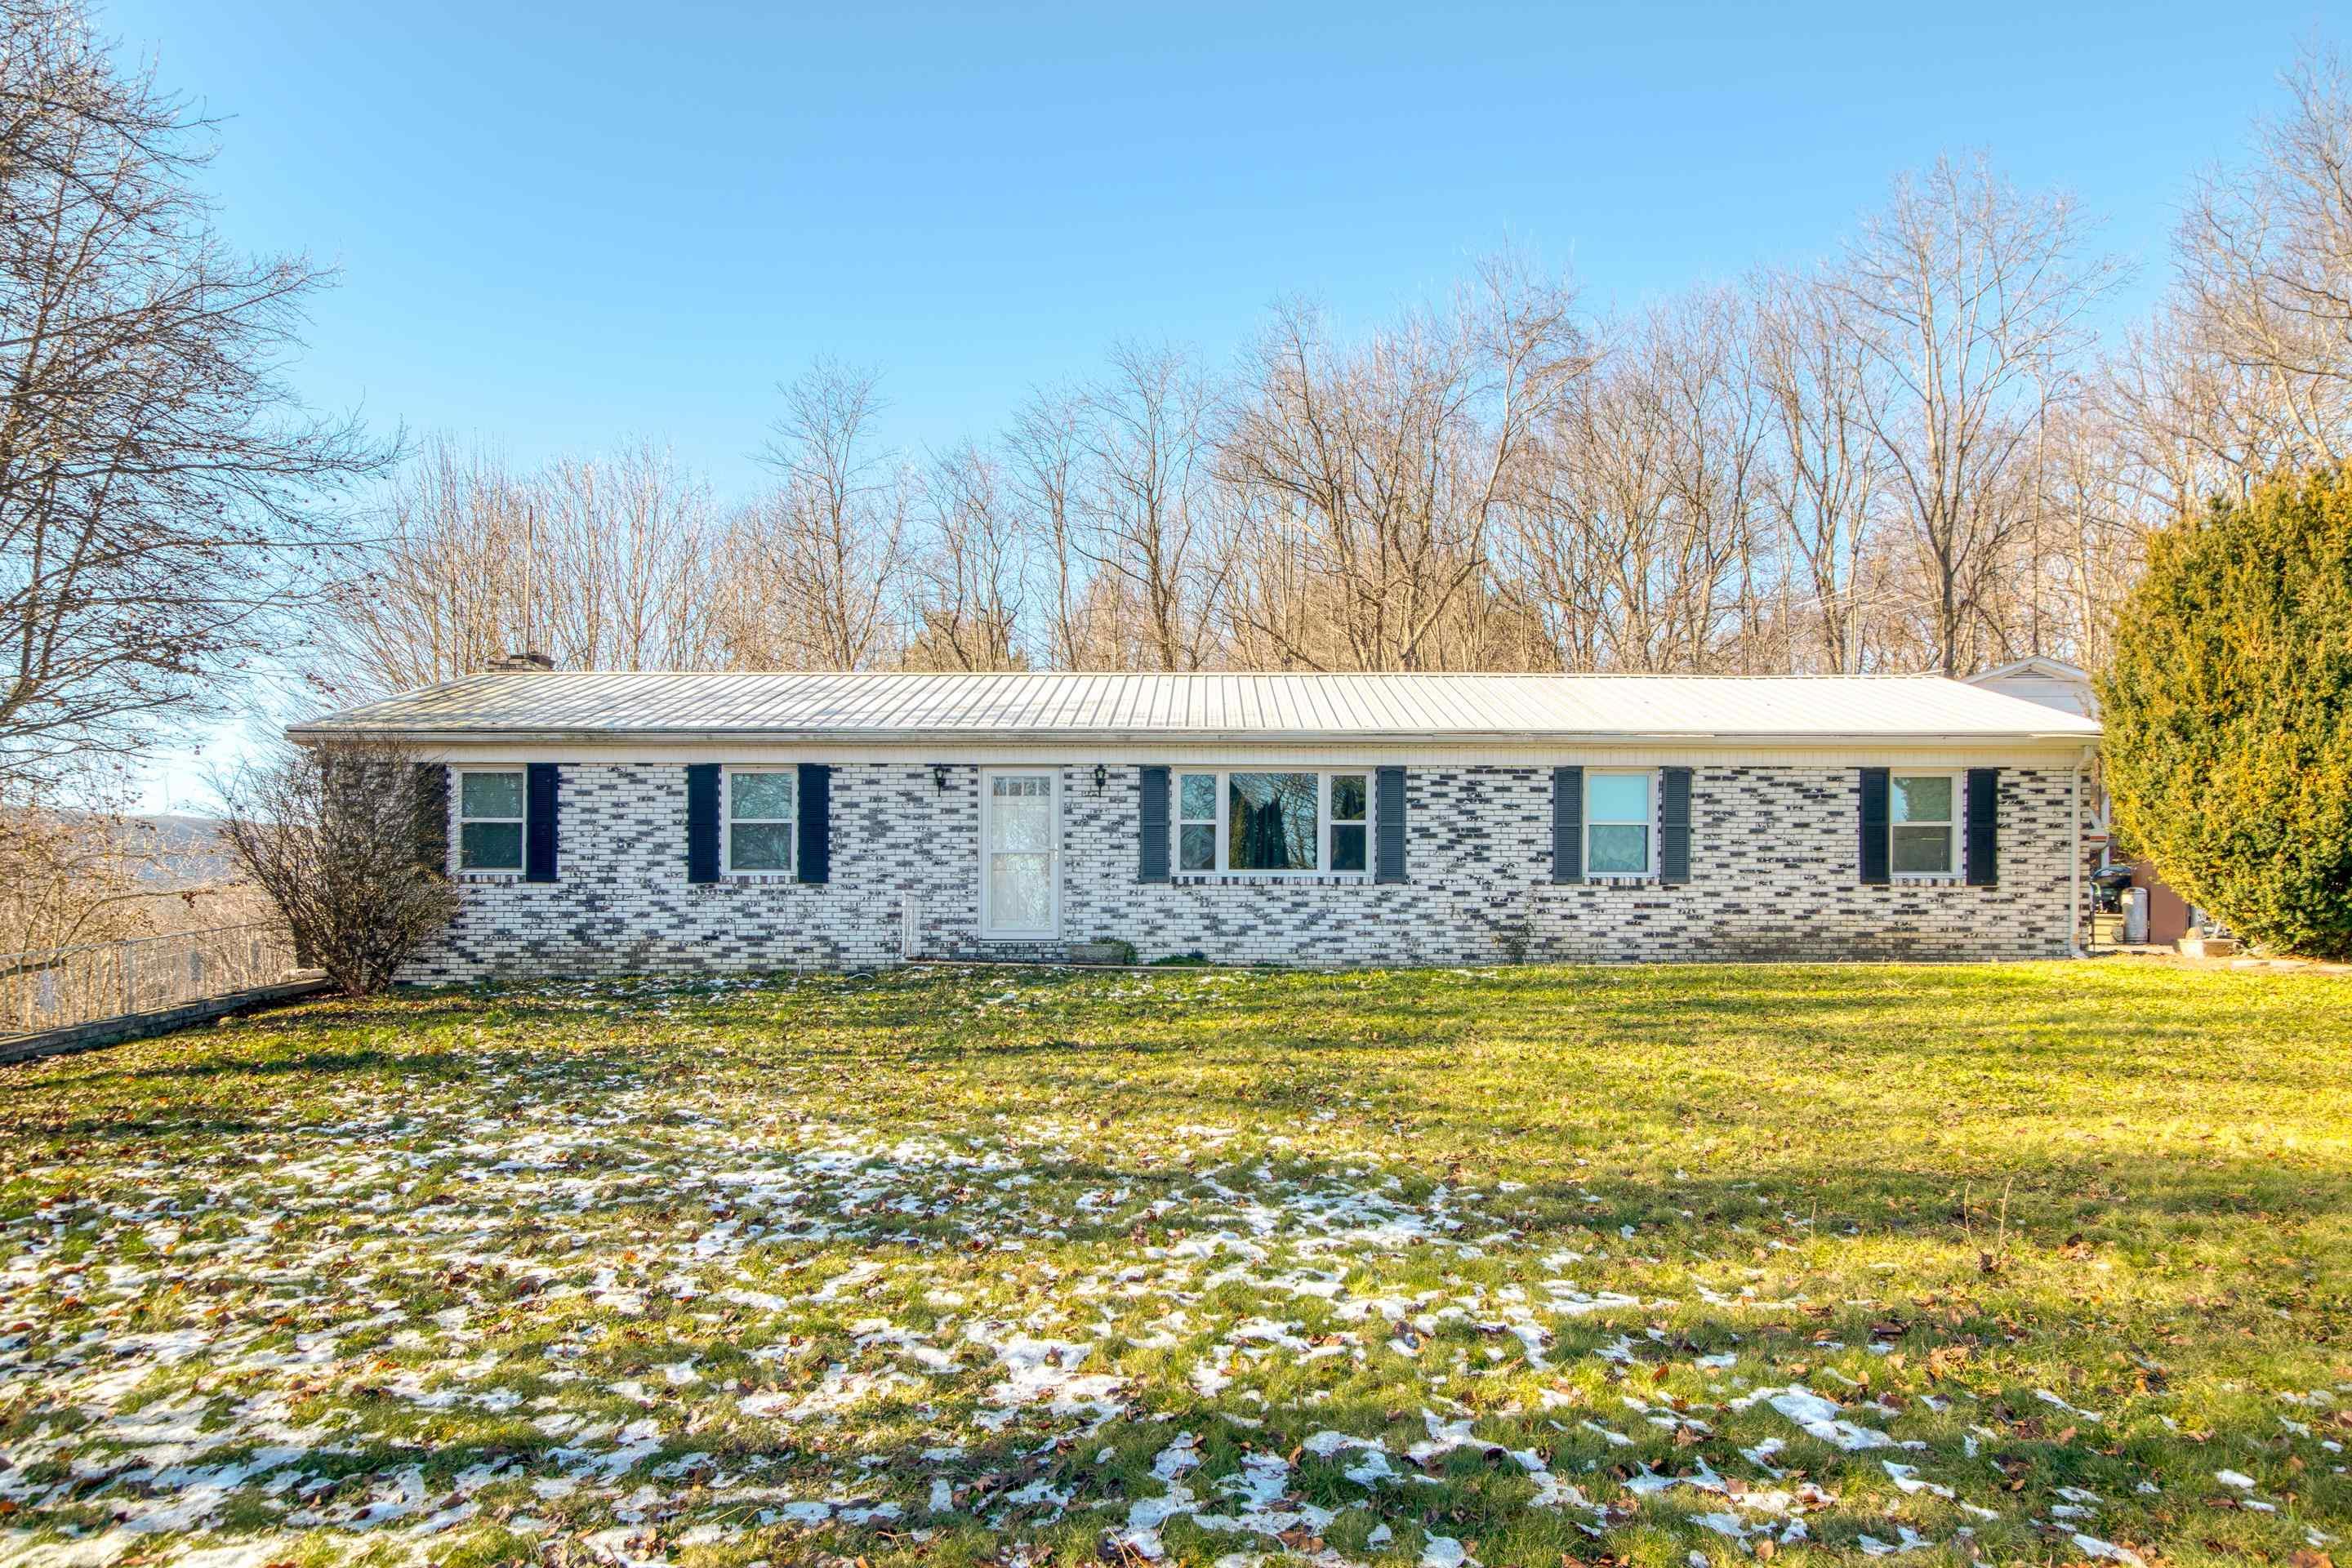 Discover the potential of 387 Hummingbird Hill in Tazewell, VA! This 3-bedroom, 1-bathroom home is competitively priced at $175,500, presenting an excellent investment opportunity. With a spacious interior, this property offers flexibility for a growing family or the chance to create dedicated workspaces. The neighborhood's convenience adds value, with proximity to local amenities, schools, and parks. Take the first step toward making 387 Hummingbird Hill your own. Schedule a viewing to explore the possibilities and envision the transformation that could turn this house into your dream home.